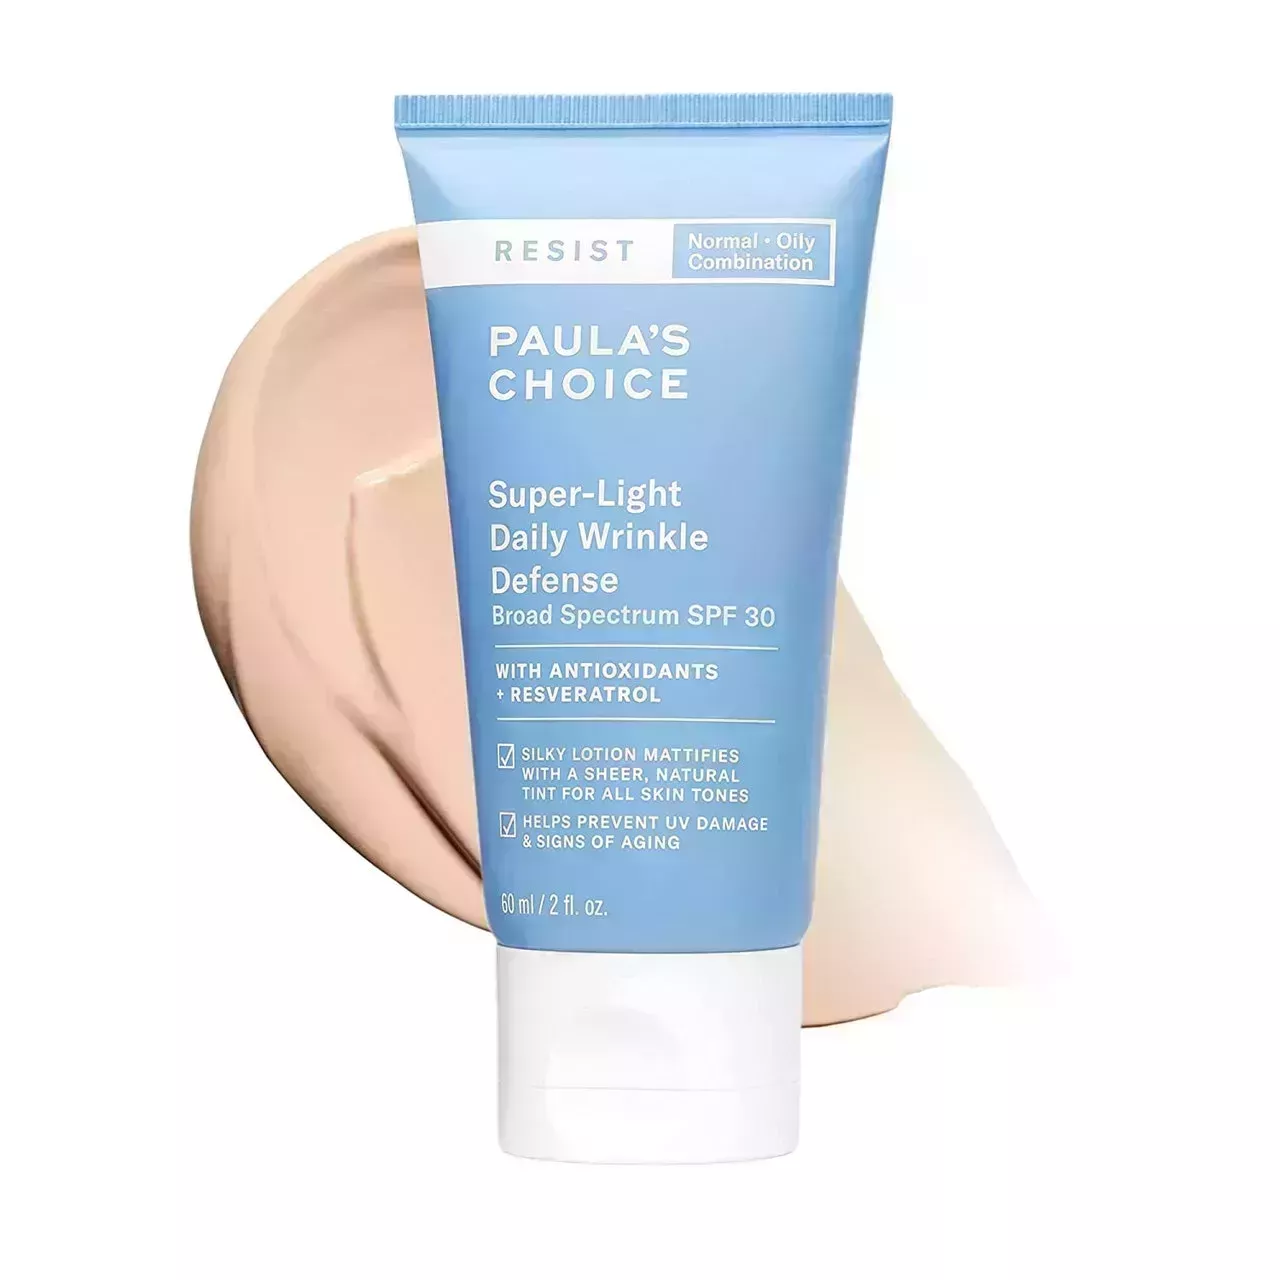 A blue tube of Paula's Choice Resist Super-Light Daily Wrinkle Defense SPF 30 and a swatch on white background